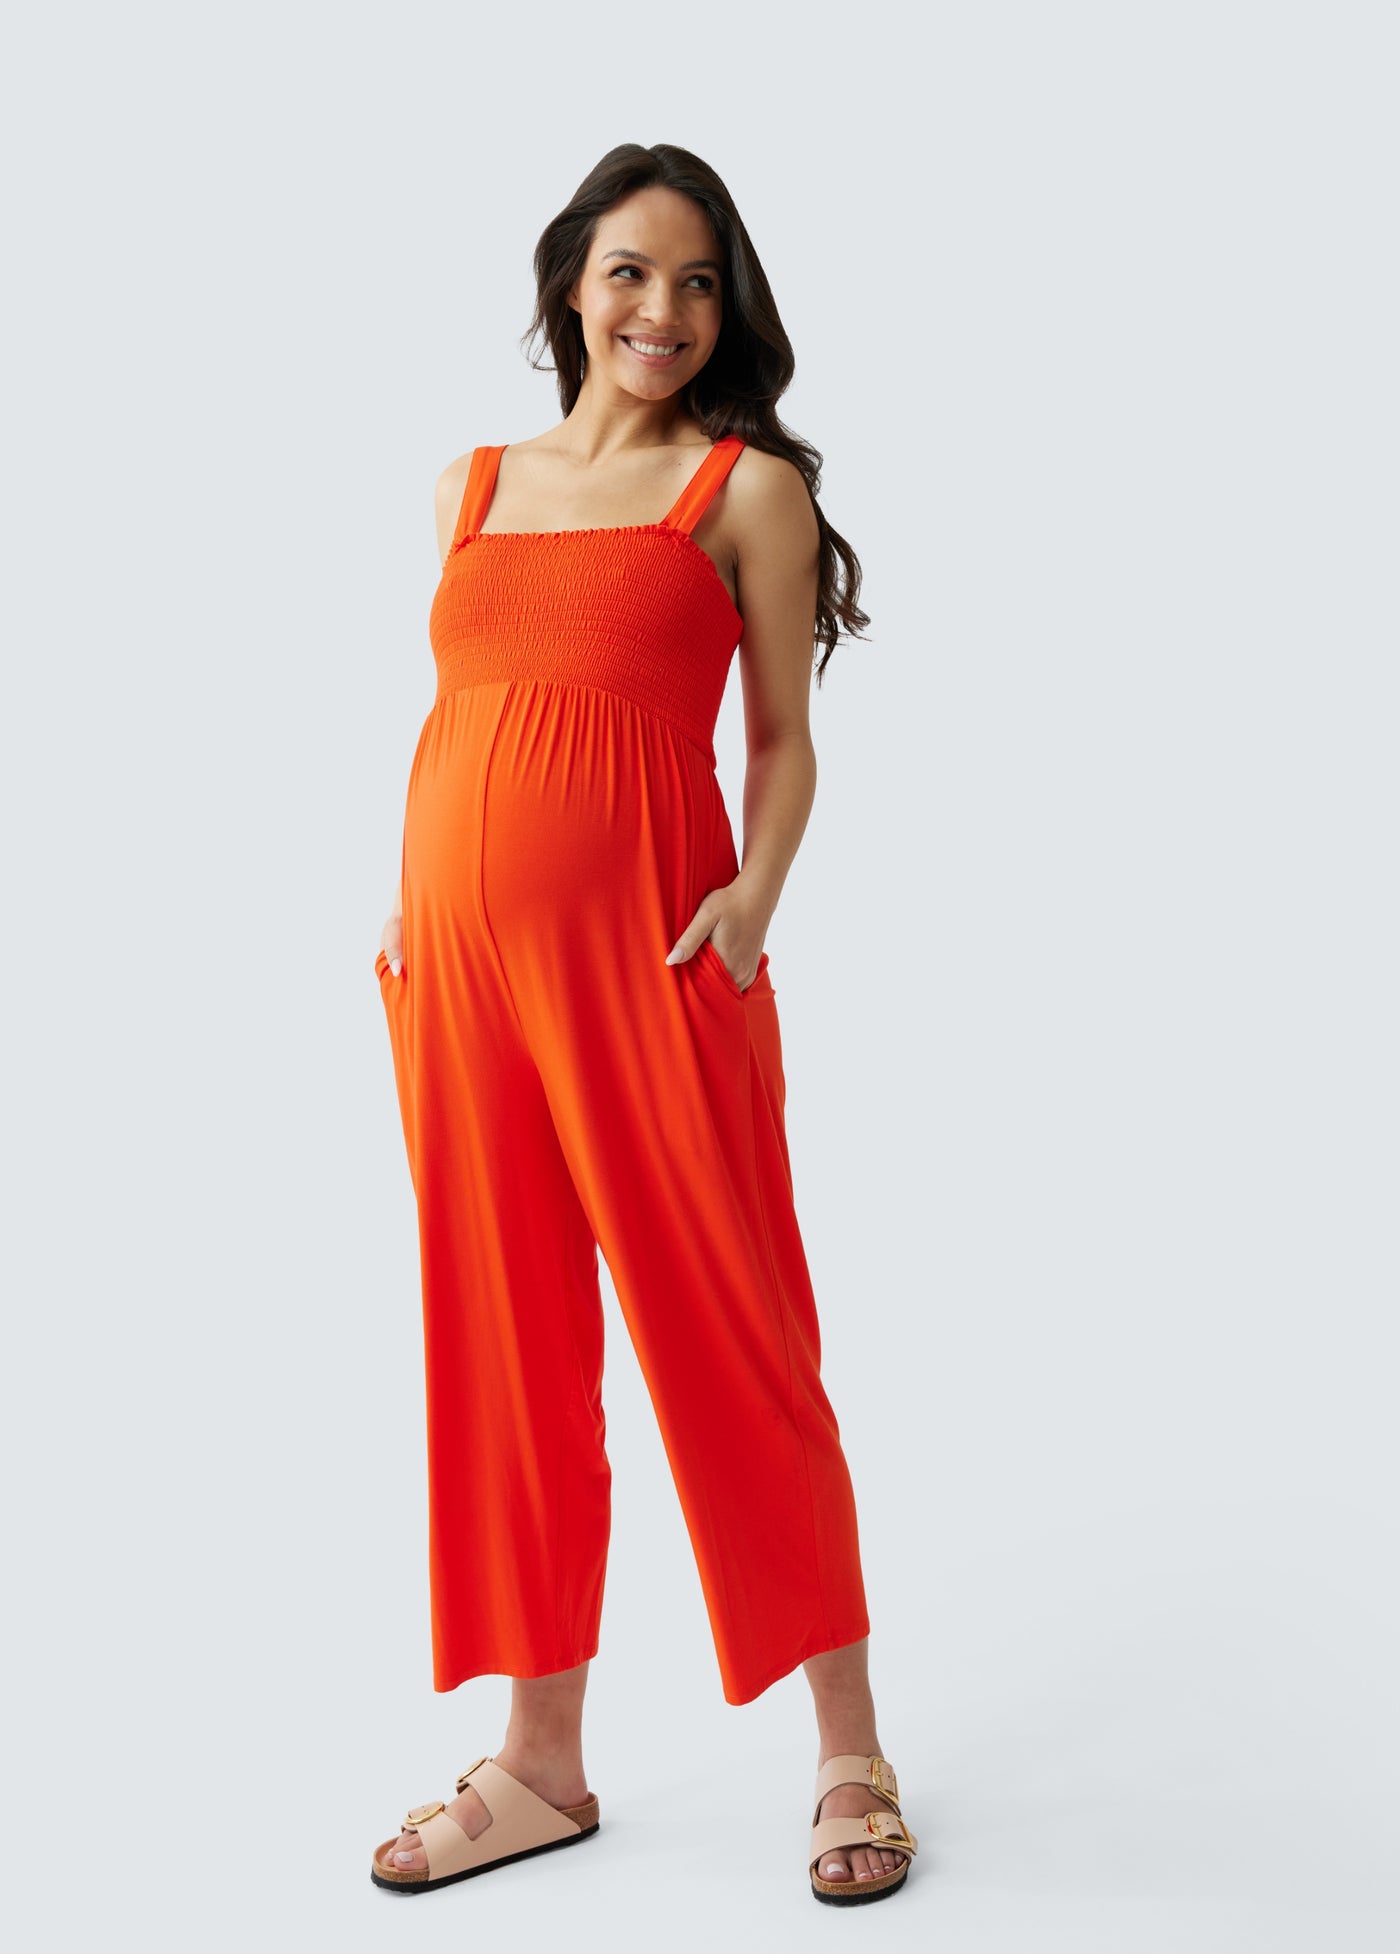 Overalls for Women Maternity Women's Summer Jumpsuits Casual Sleeveless  Jumpsuit | eBay